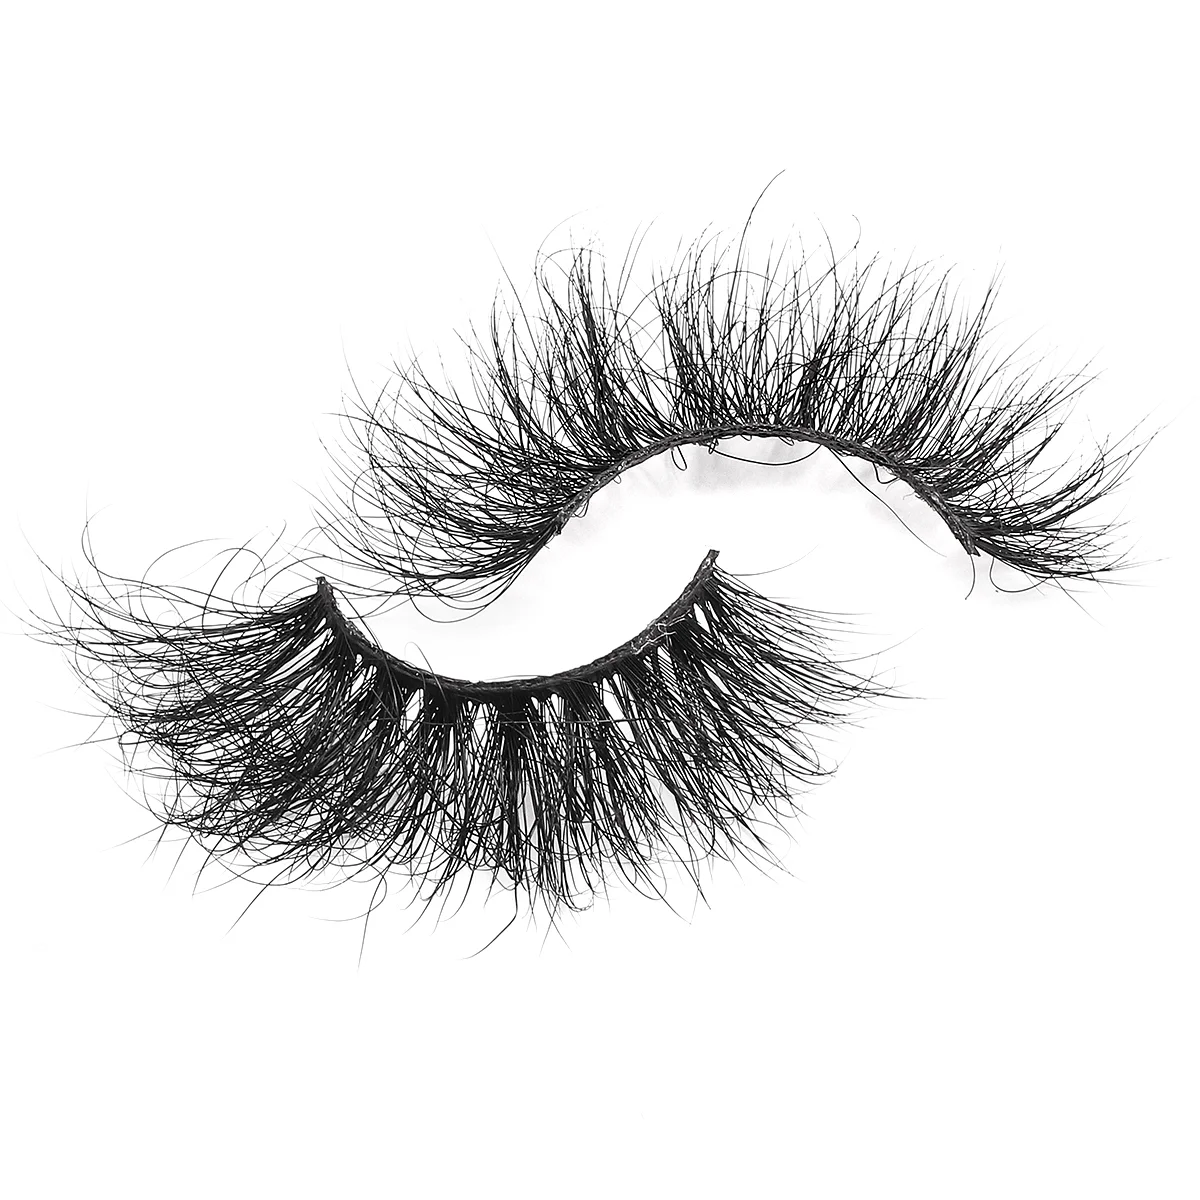 Inquiry for buying high quality 6D mink eyelash